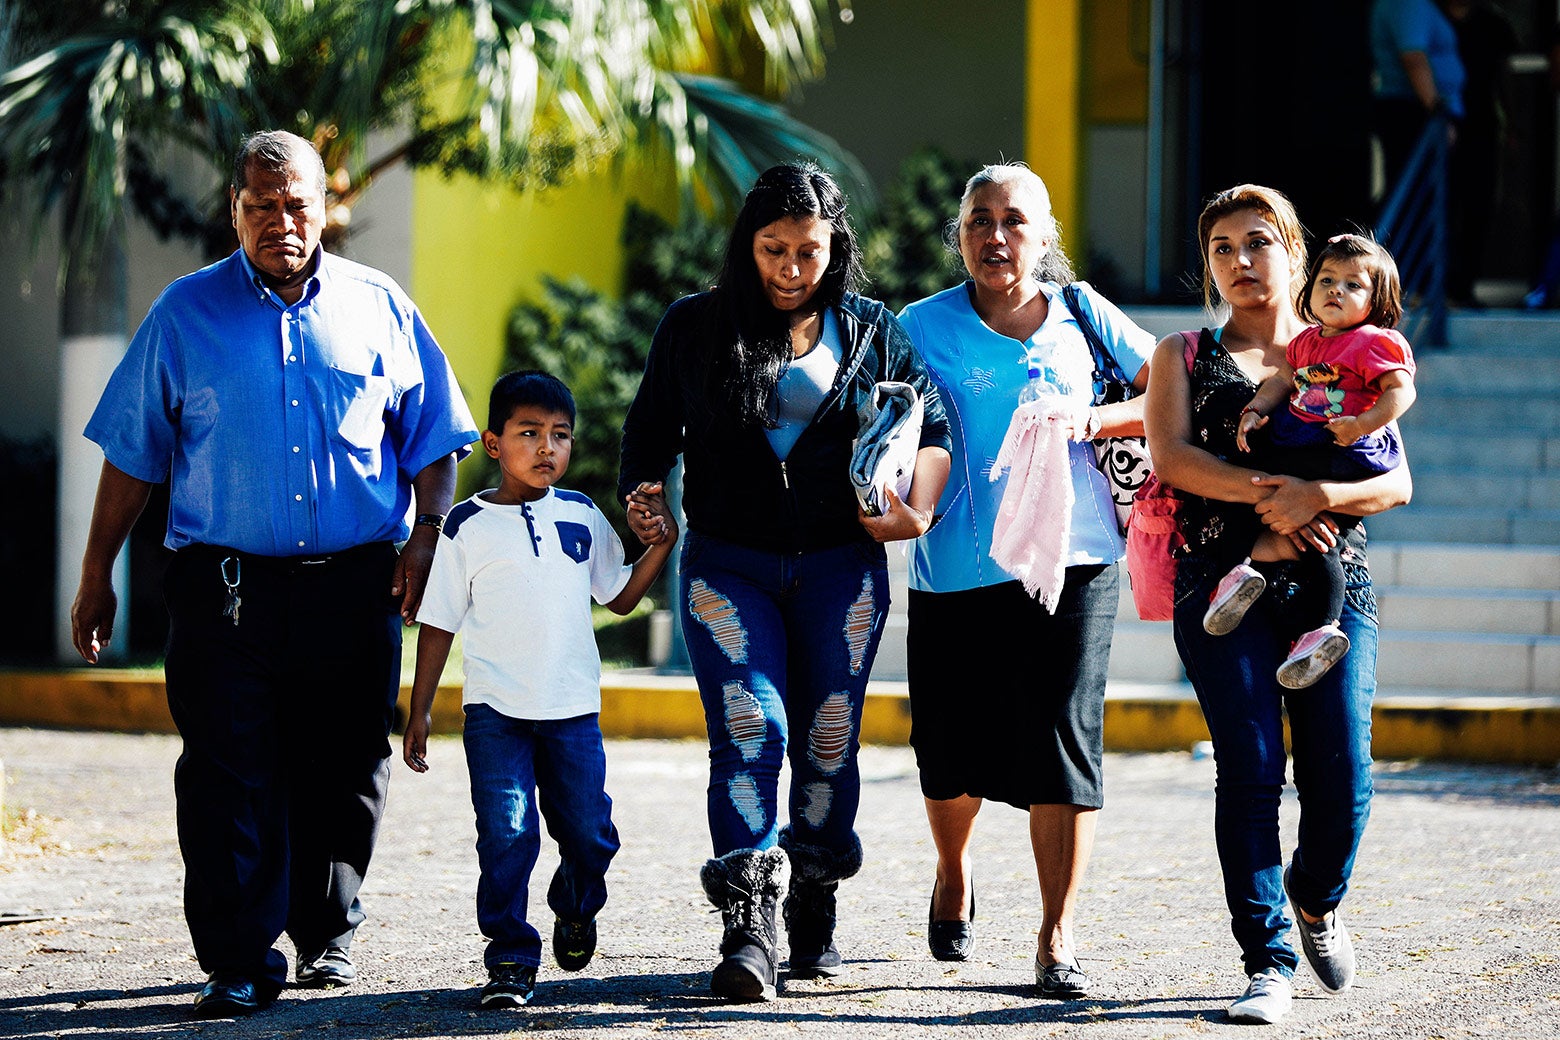 A deportee walks out with her family at an immigration facility in San Salvador, El Salvador, on Jan. 11.